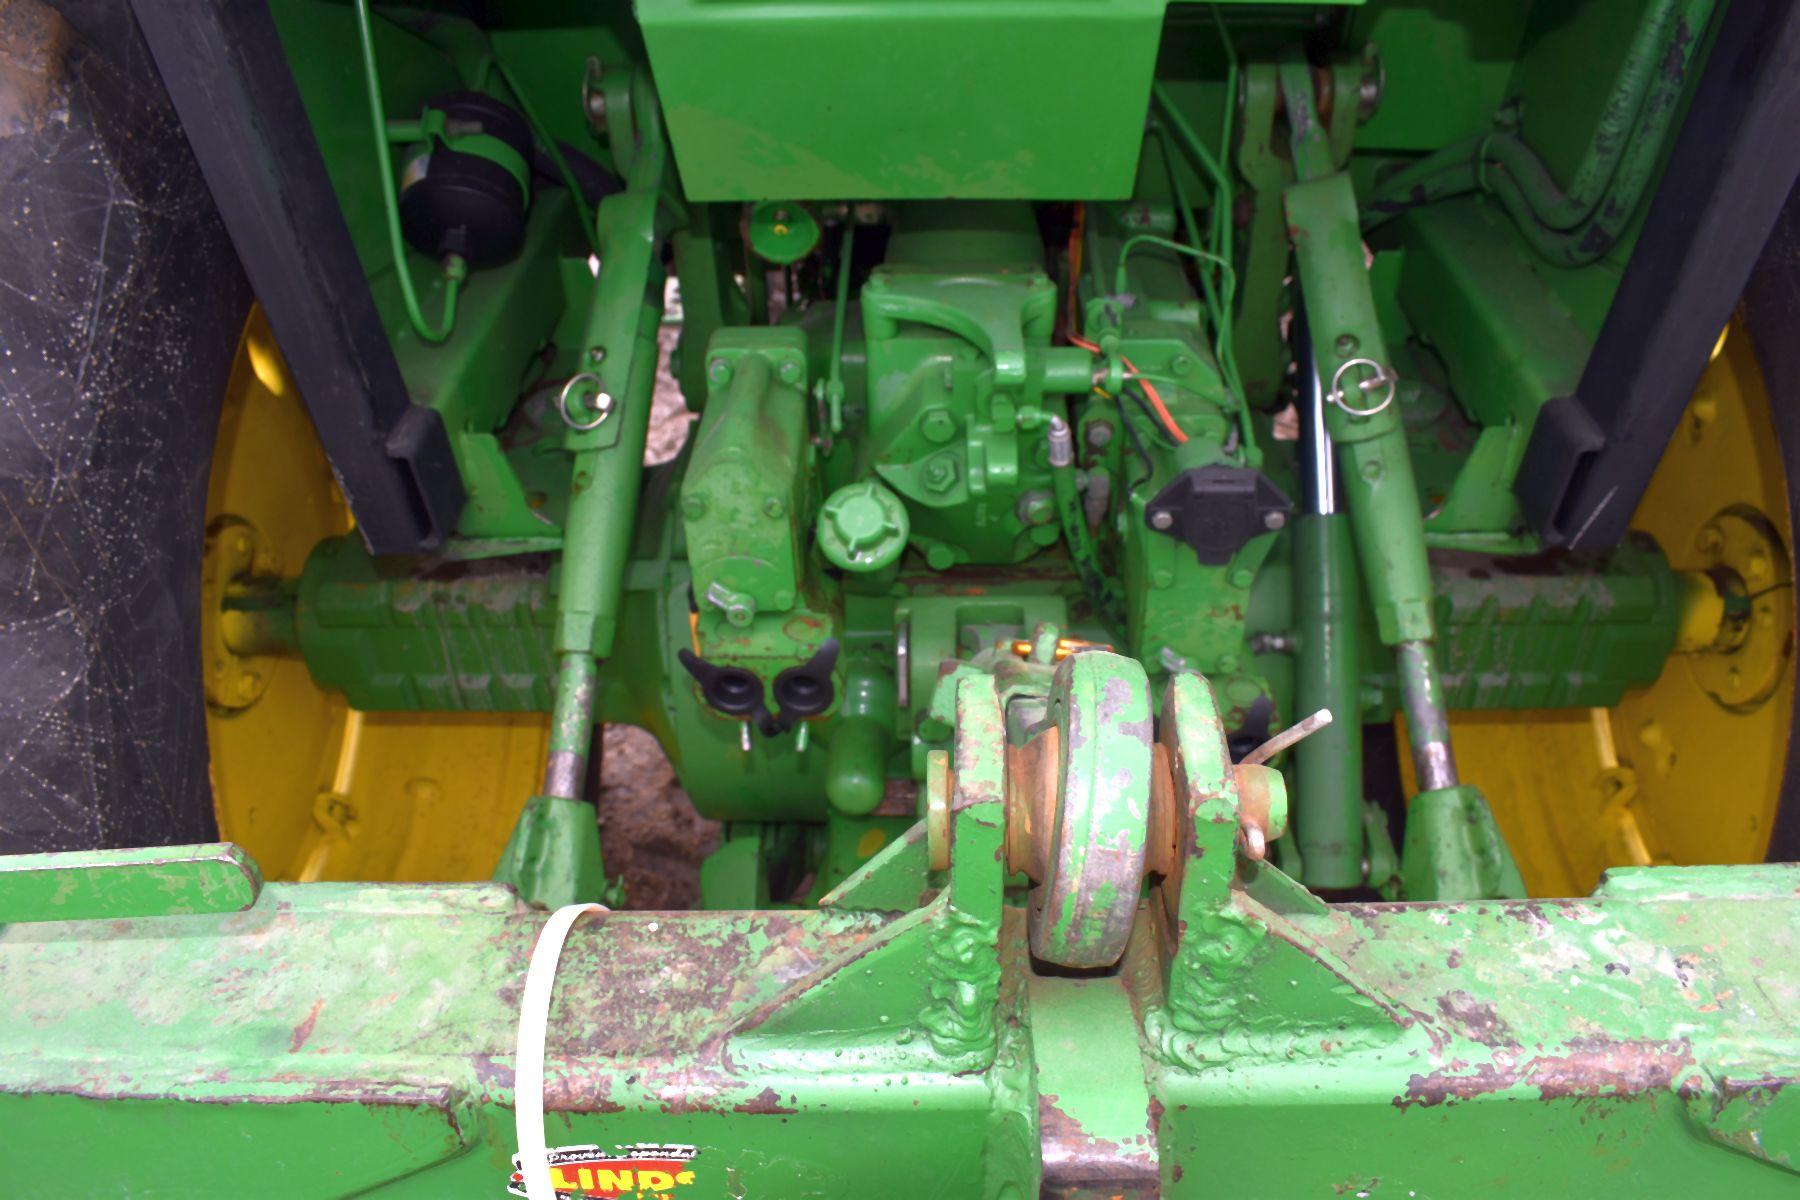 1979 John Deere 4440, Quad Range, 6,633 Actual One Owner Hours, 18.4-38 With Axle Duals, 2 Hydraulic